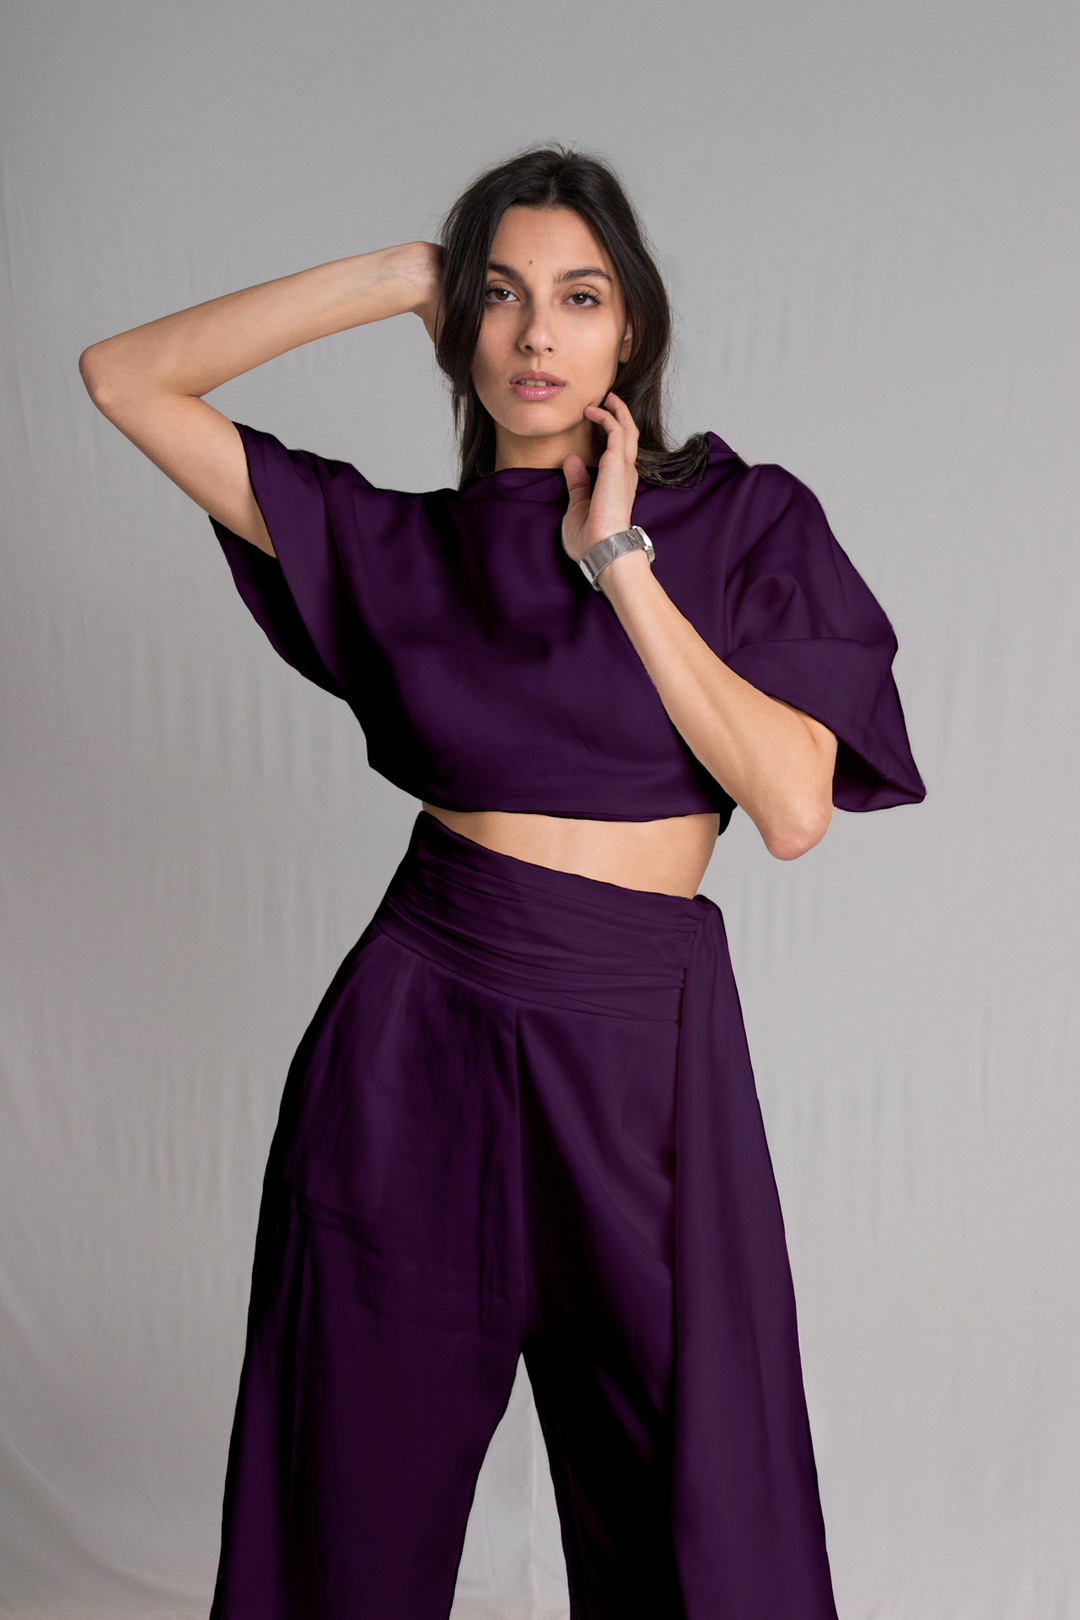 Purple cropped top with a relaxed cowl neckline and high-waist pants with a hidden zipper pockets and a hand-ruched waistband